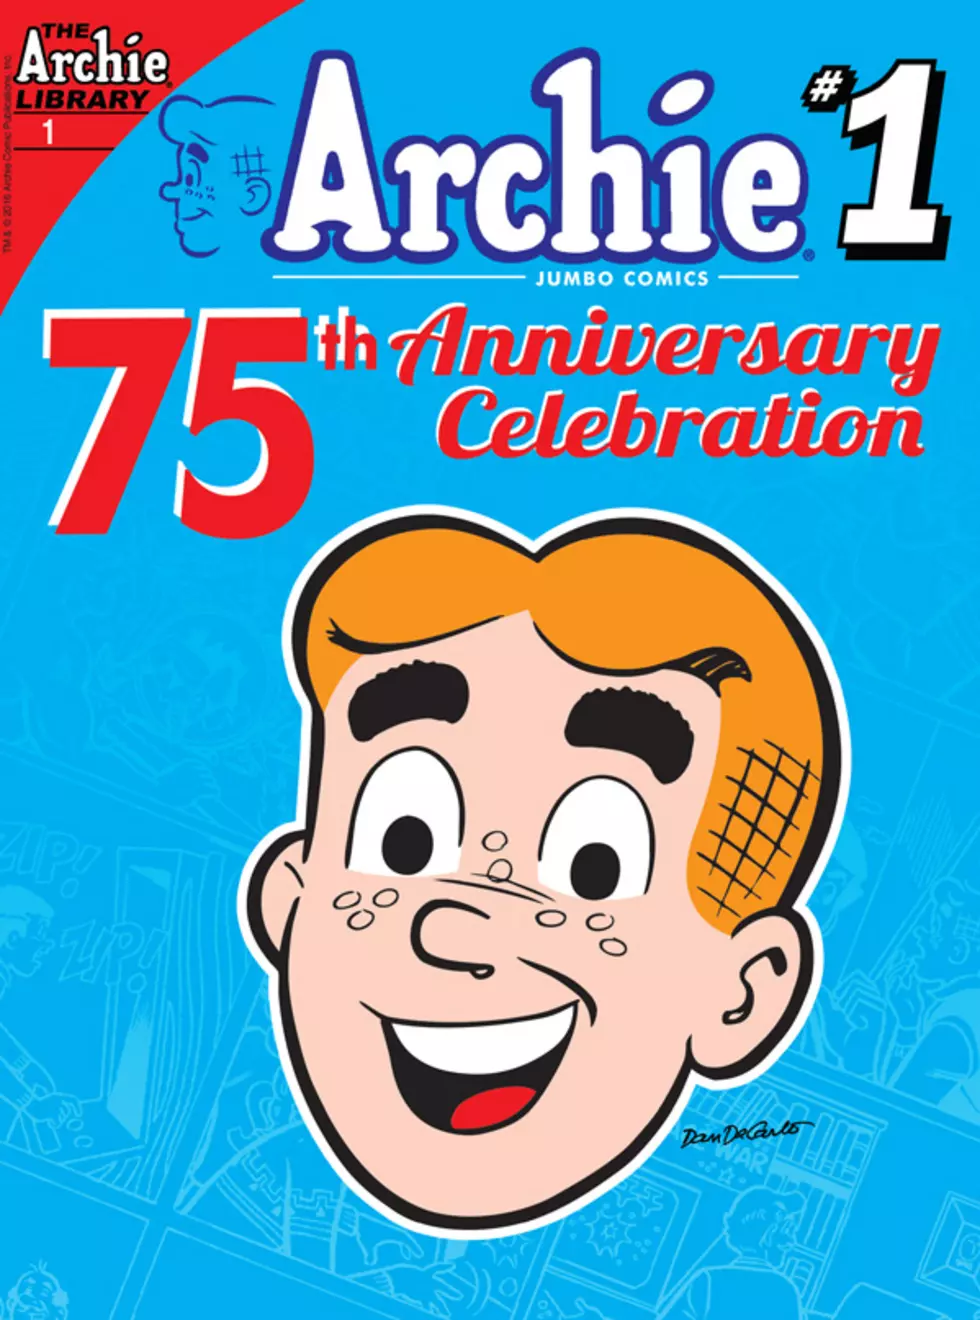 Celebrate The Archieversary (And This Week&#8217;s Longest Title) With &#8216;Archie Jumbo Comics 75th Anniversary Celebration Digest&#8217; #1 [Preview]